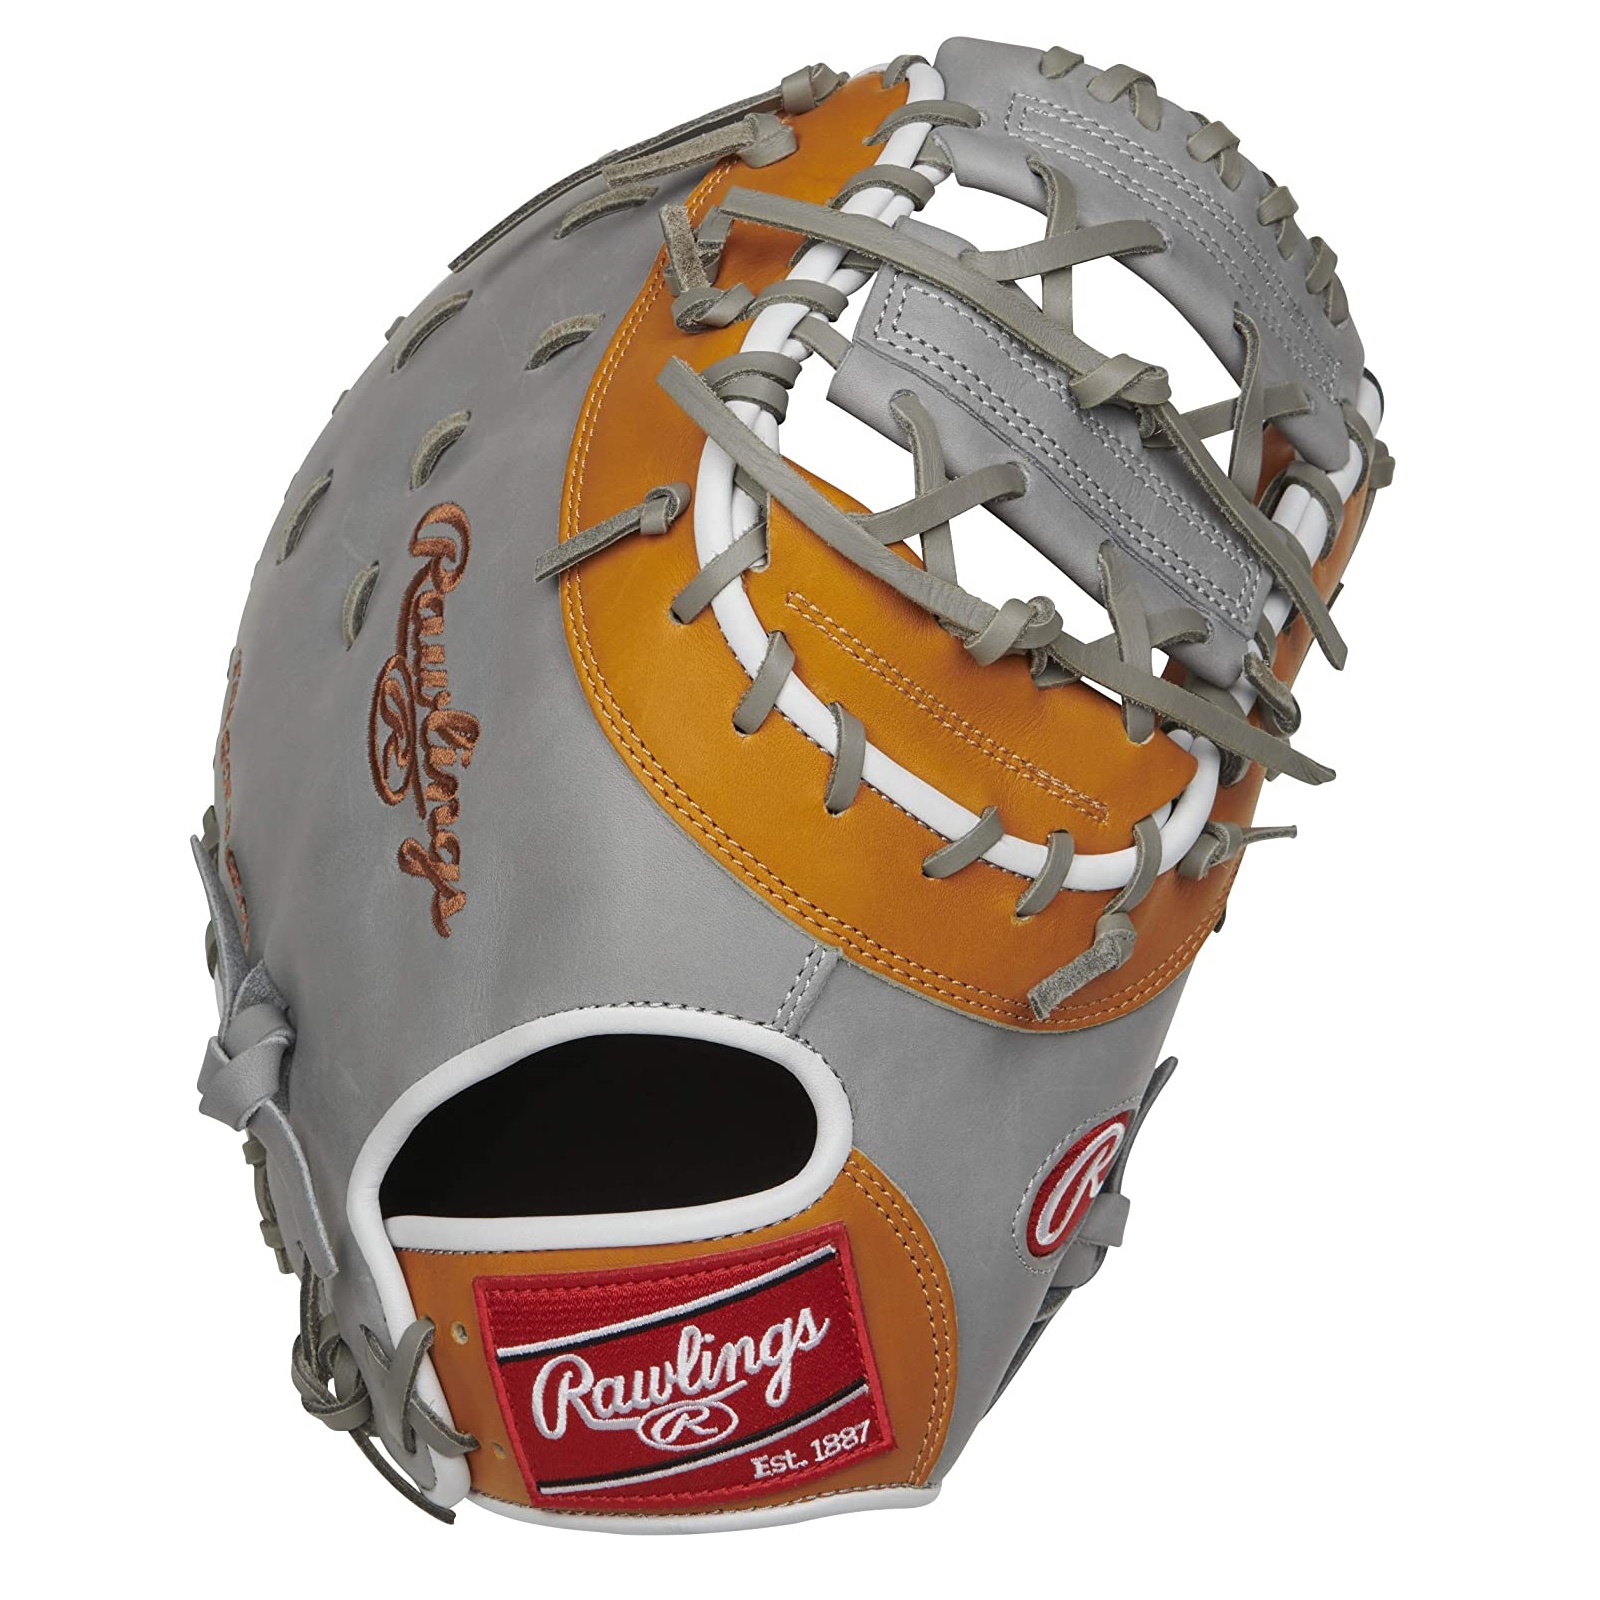 rawlings-heart-of-the-hide-anthony-rizzo-gameday-model-first-base-baseball-glove-grey-tan-12-75-inch-right-hand-throw PROAR44-RightHandThrow Rawlings  As a world champion Anthony Rizzo could use any glove but